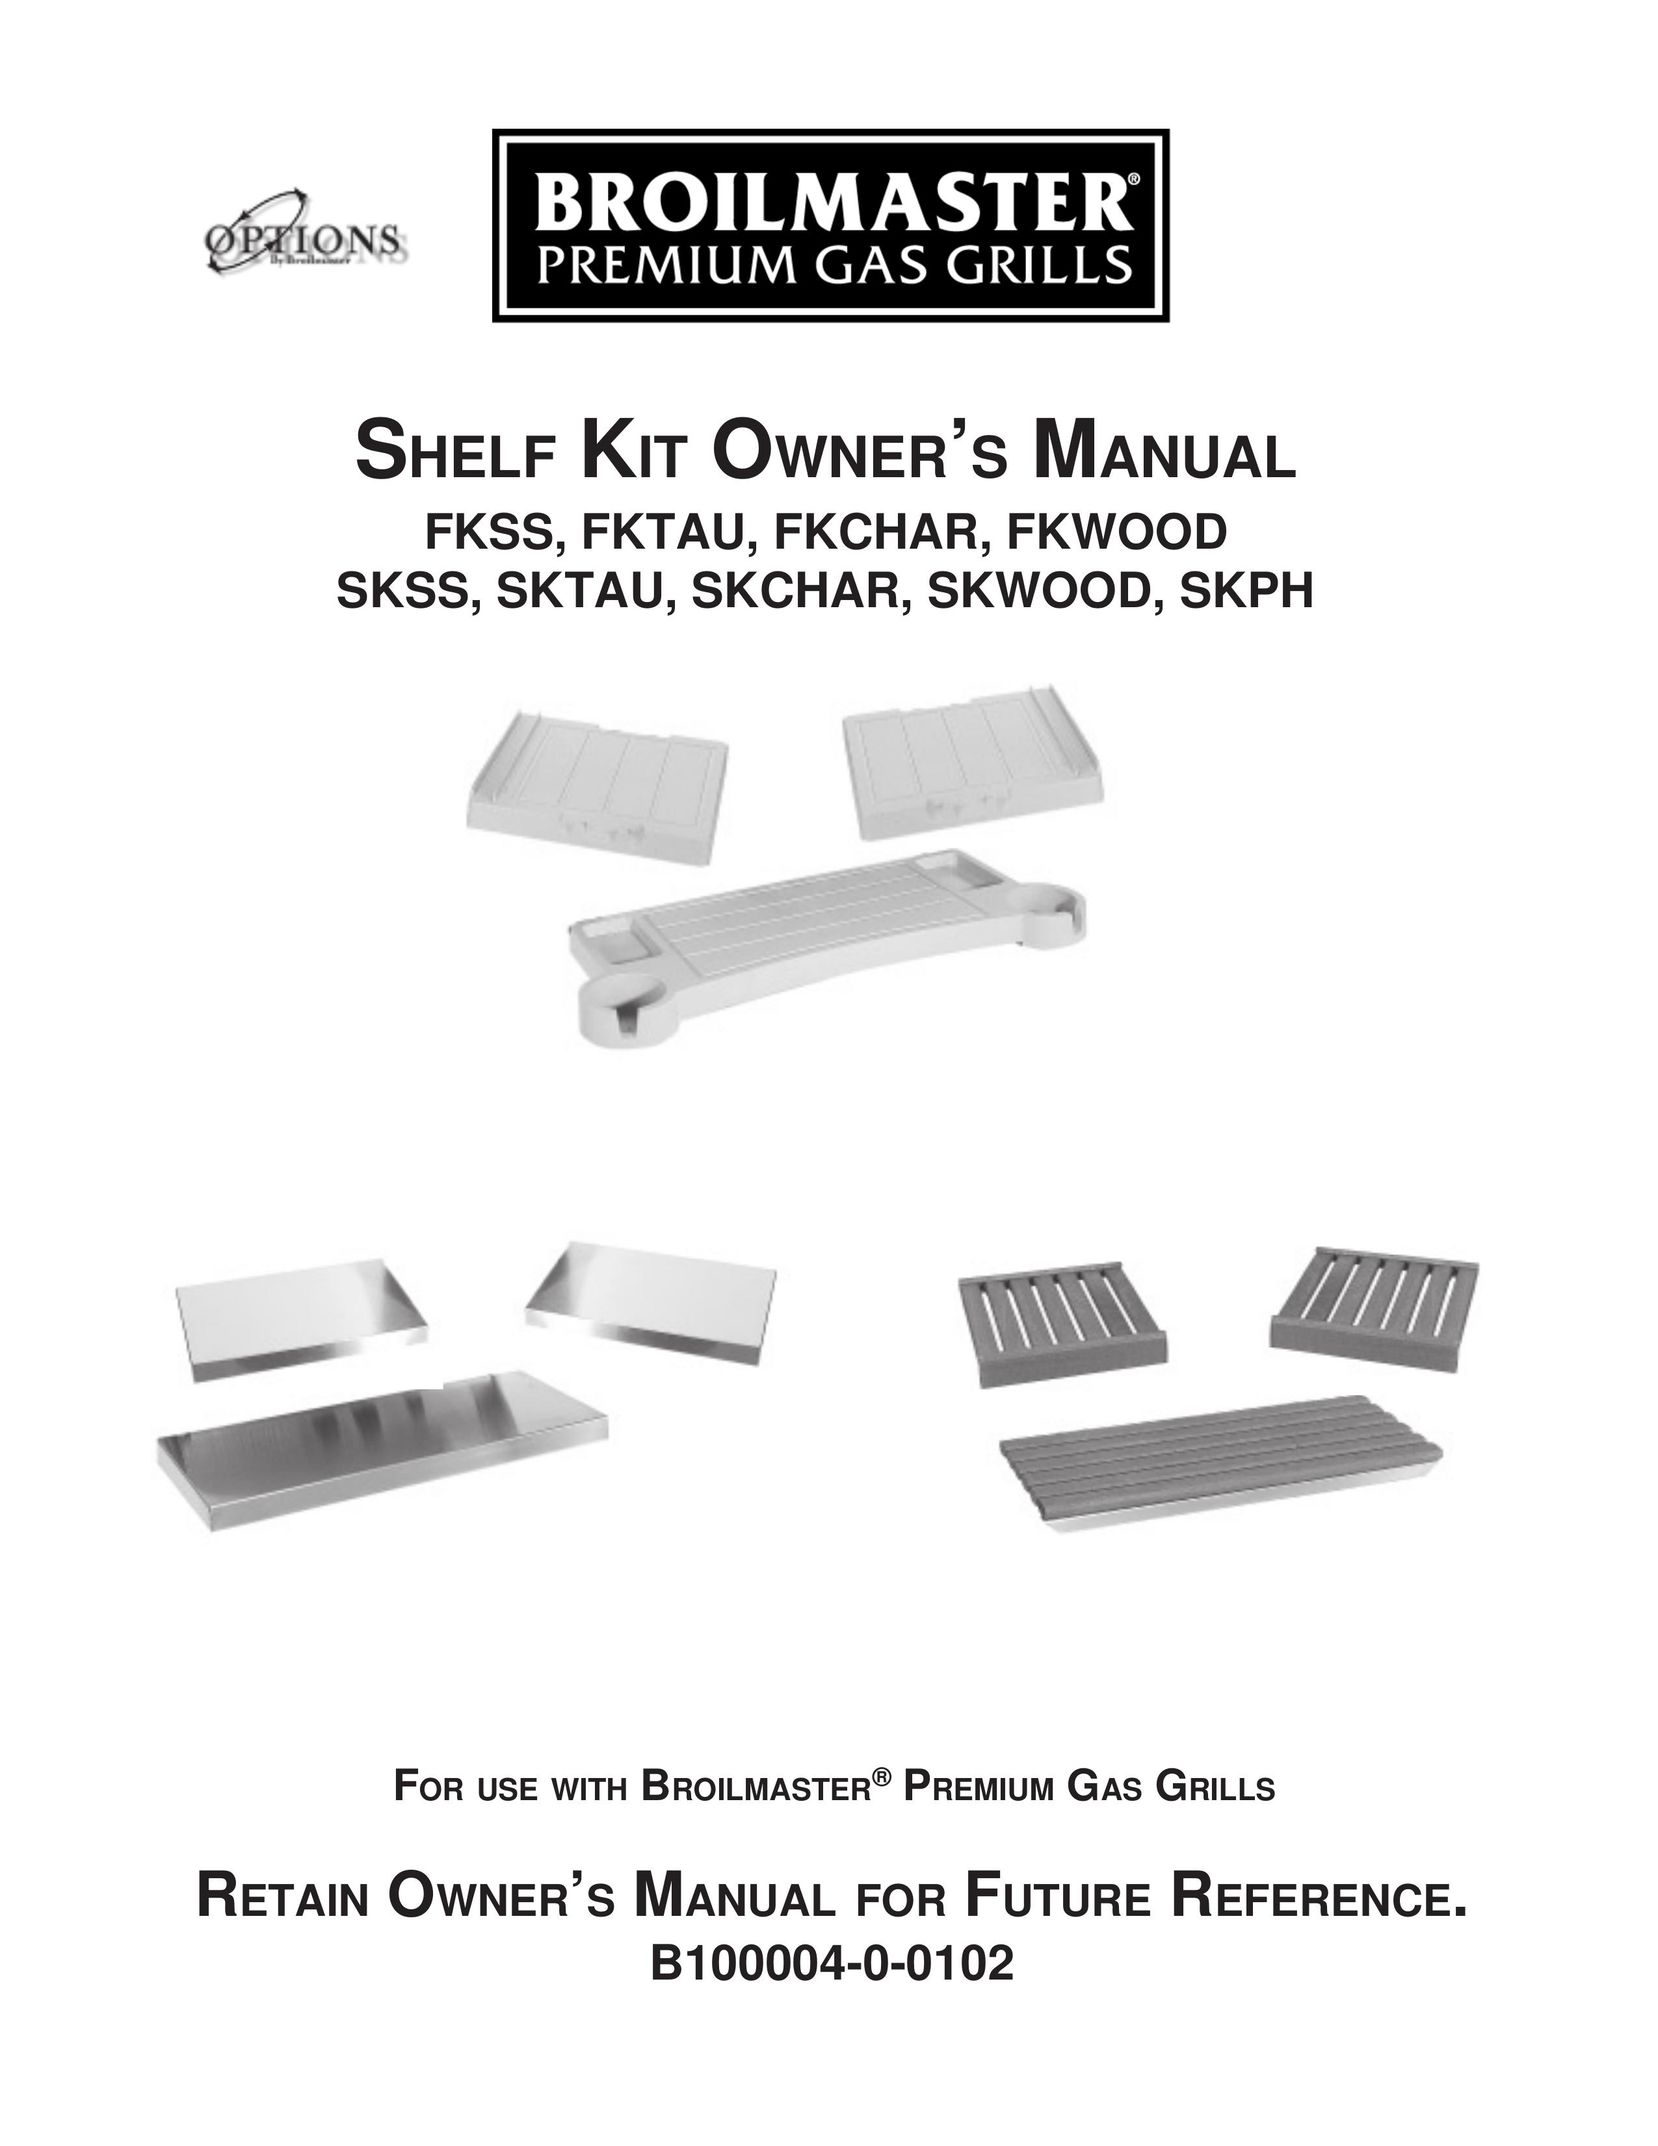 Broilmaster FKWOOD Kitchen Grill User Manual